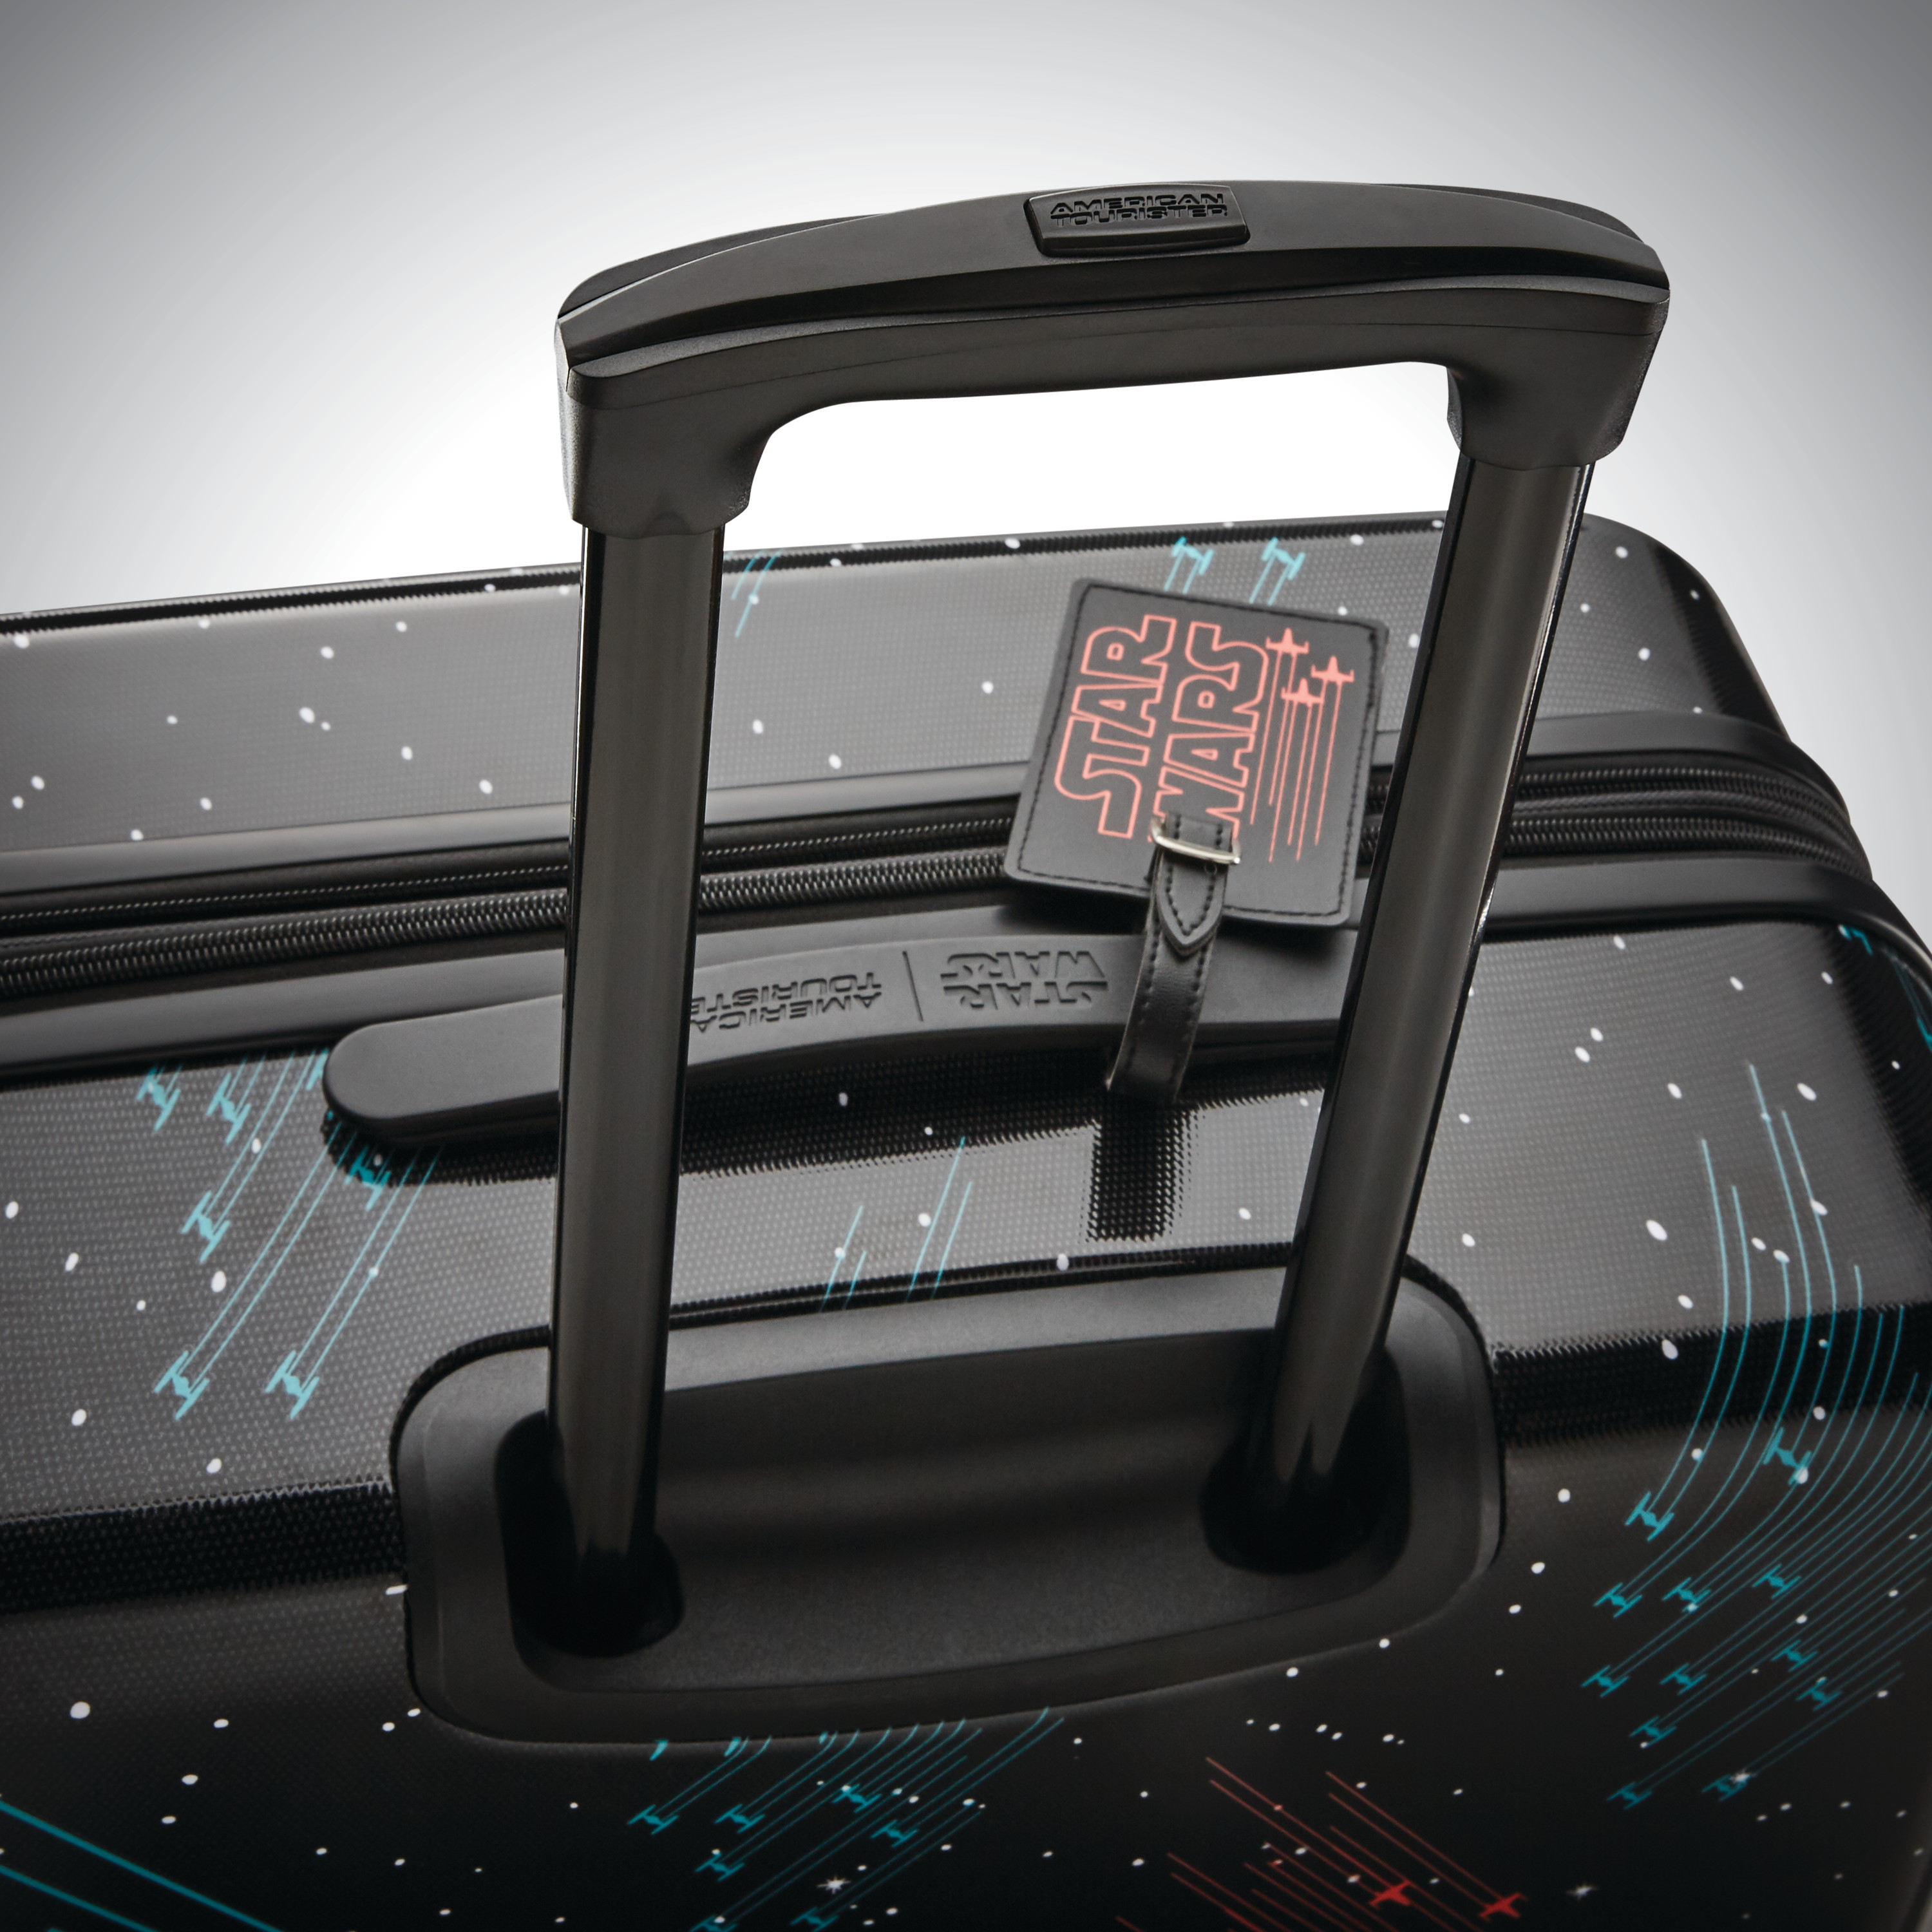 American Tourister Star Wars 21" Hardside Spinner Luggage - image 4 of 7